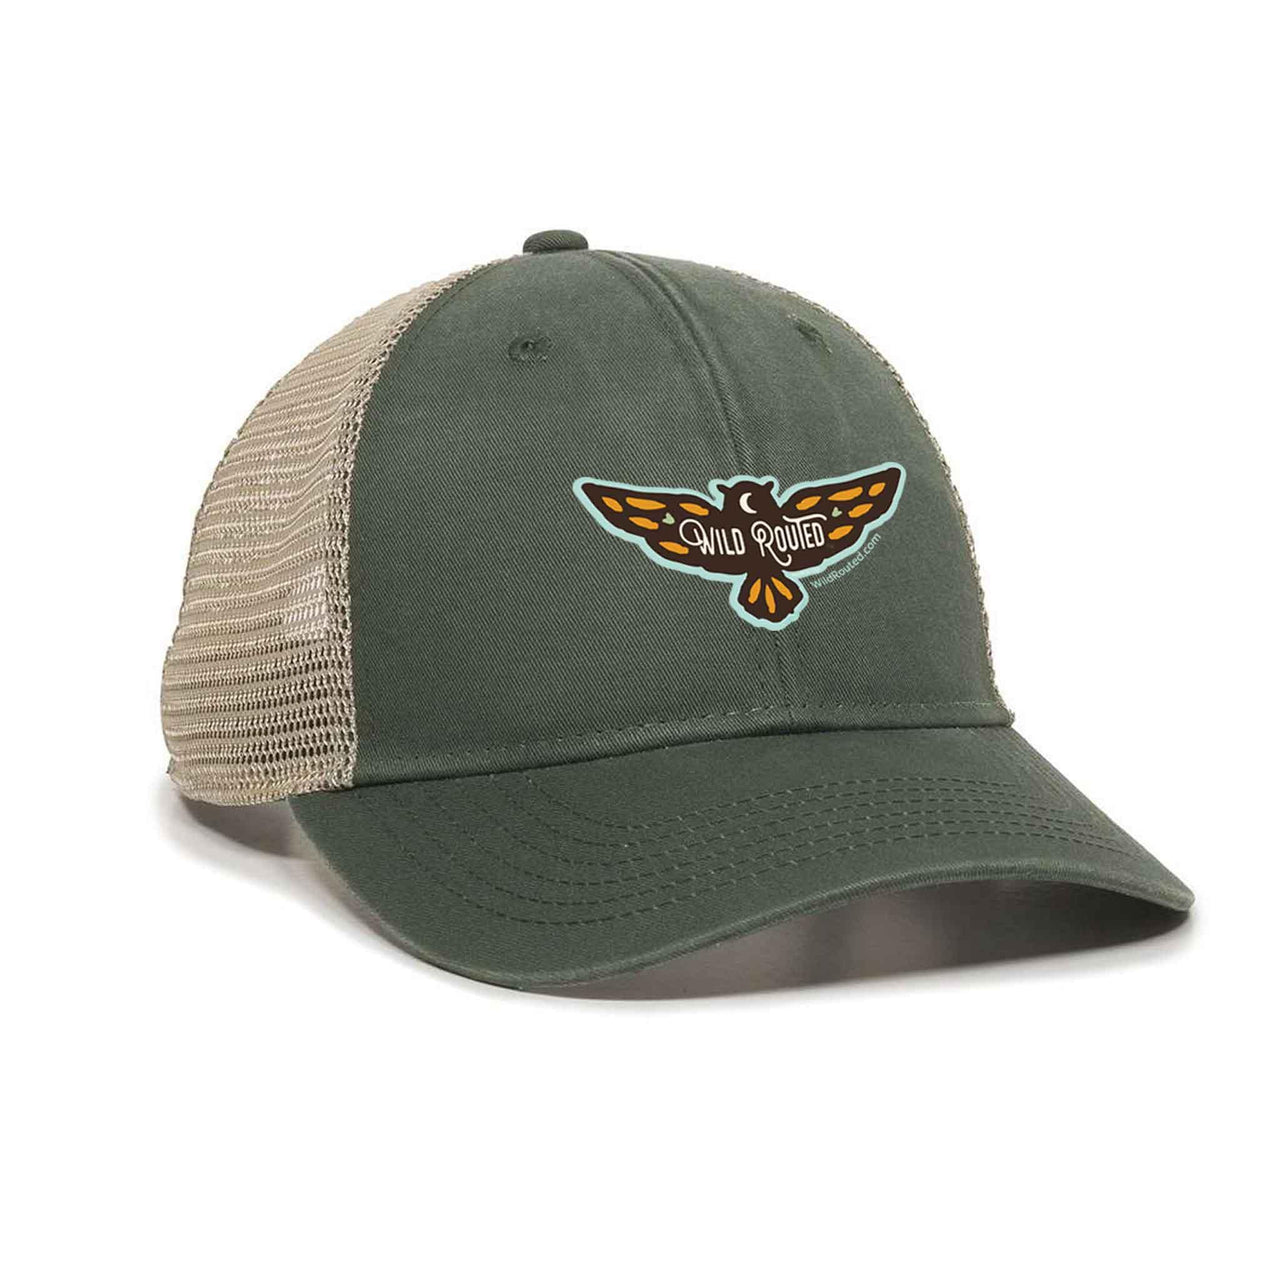 Women's Ponytail Cap - Wild Routed Owl - Wild Routed